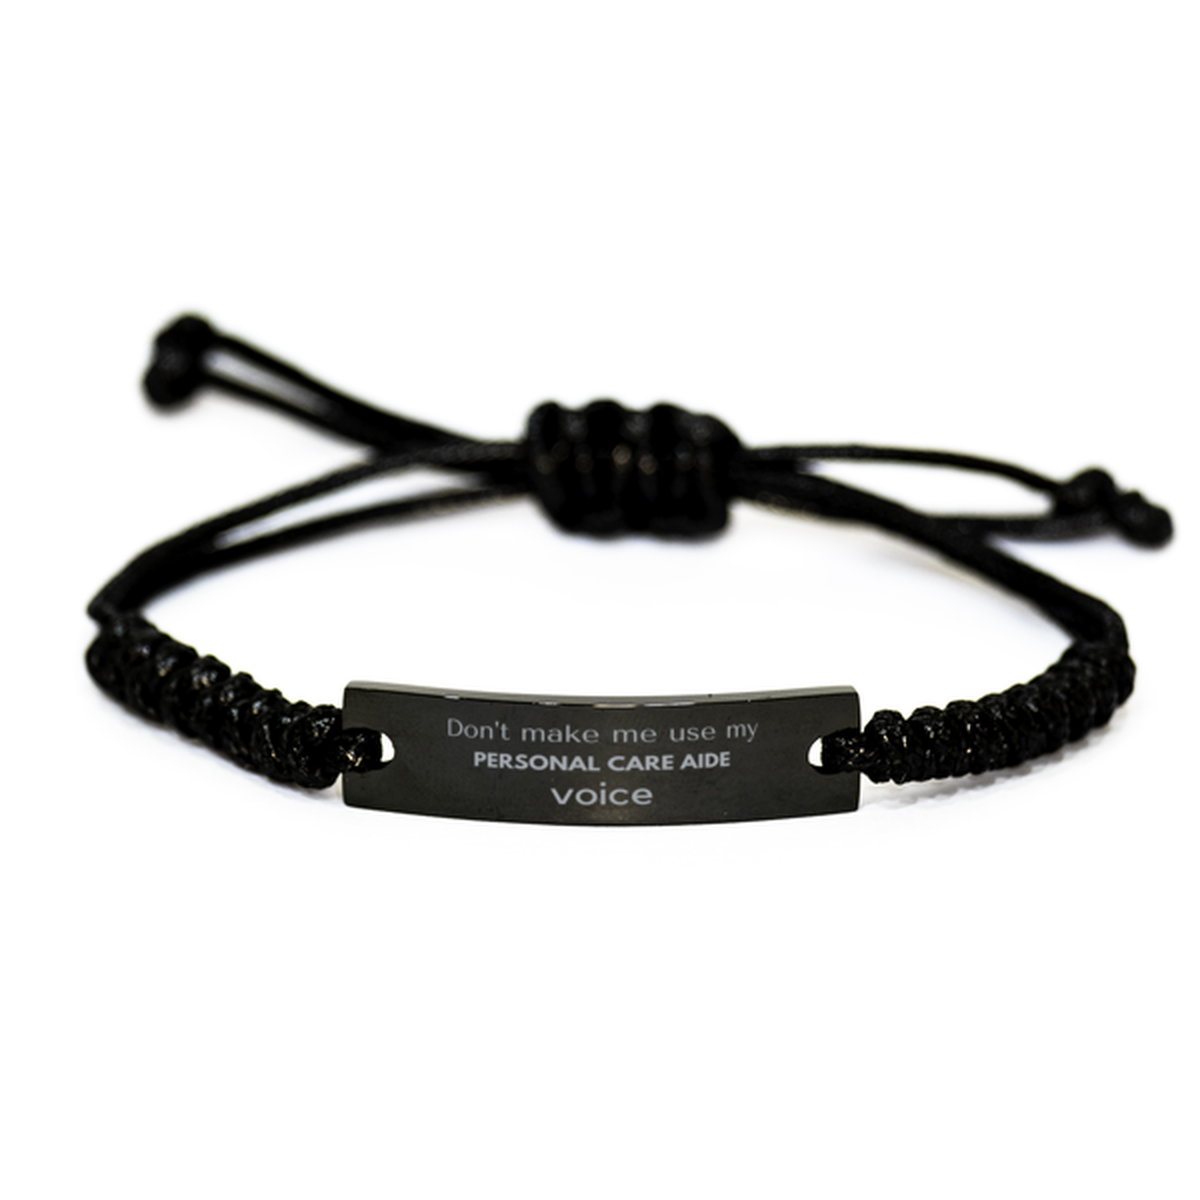 Don't make me use my Personal Care Aide voice, Sarcasm Personal Care Aide Gifts, Christmas Personal Care Aide Black Rope Bracelet Birthday Unique Gifts For Personal Care Aide Coworkers, Men, Women, Colleague, Friends